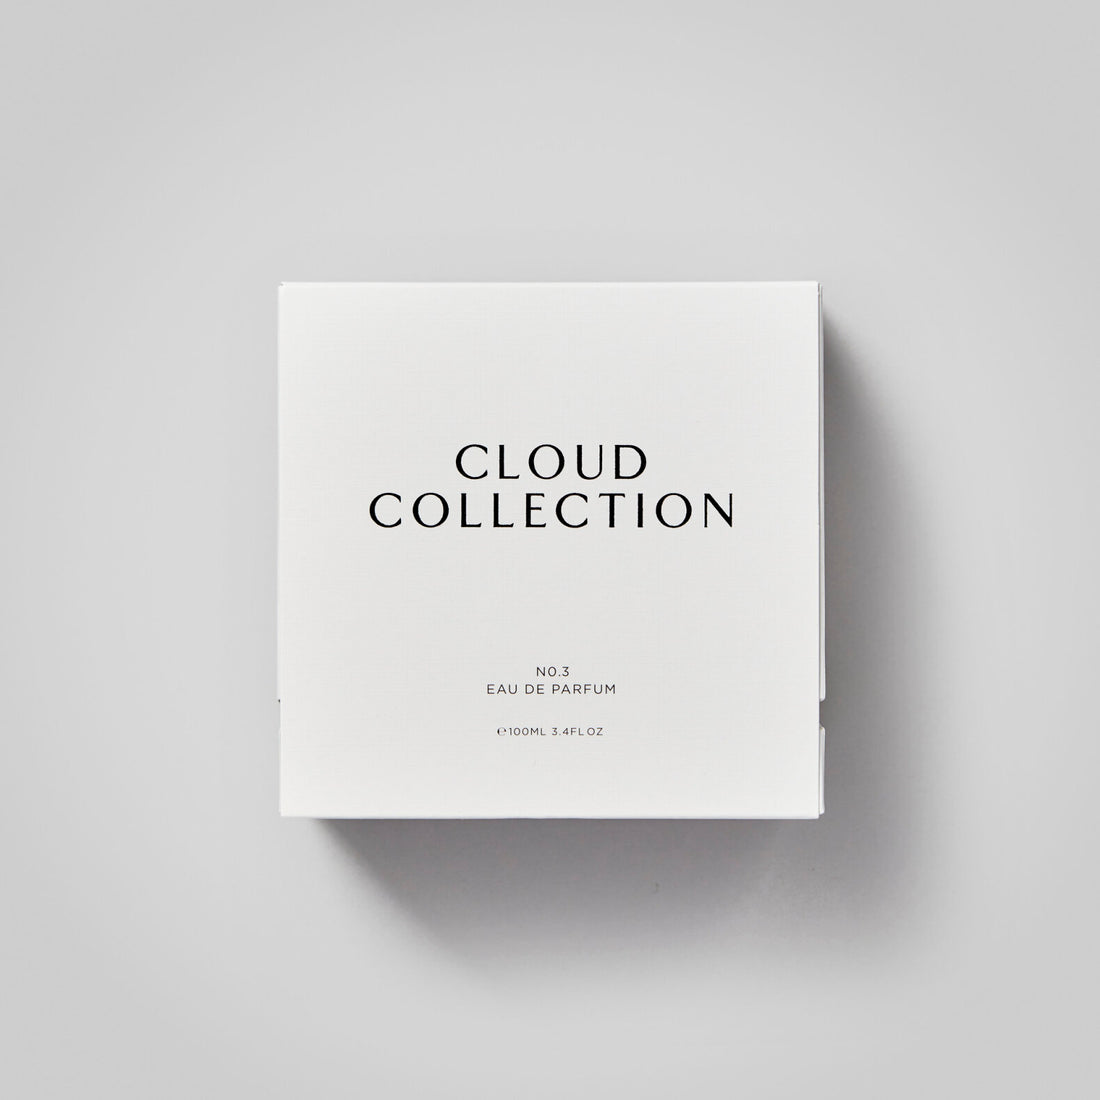 CLOUD COLLECTION No.3 100ml